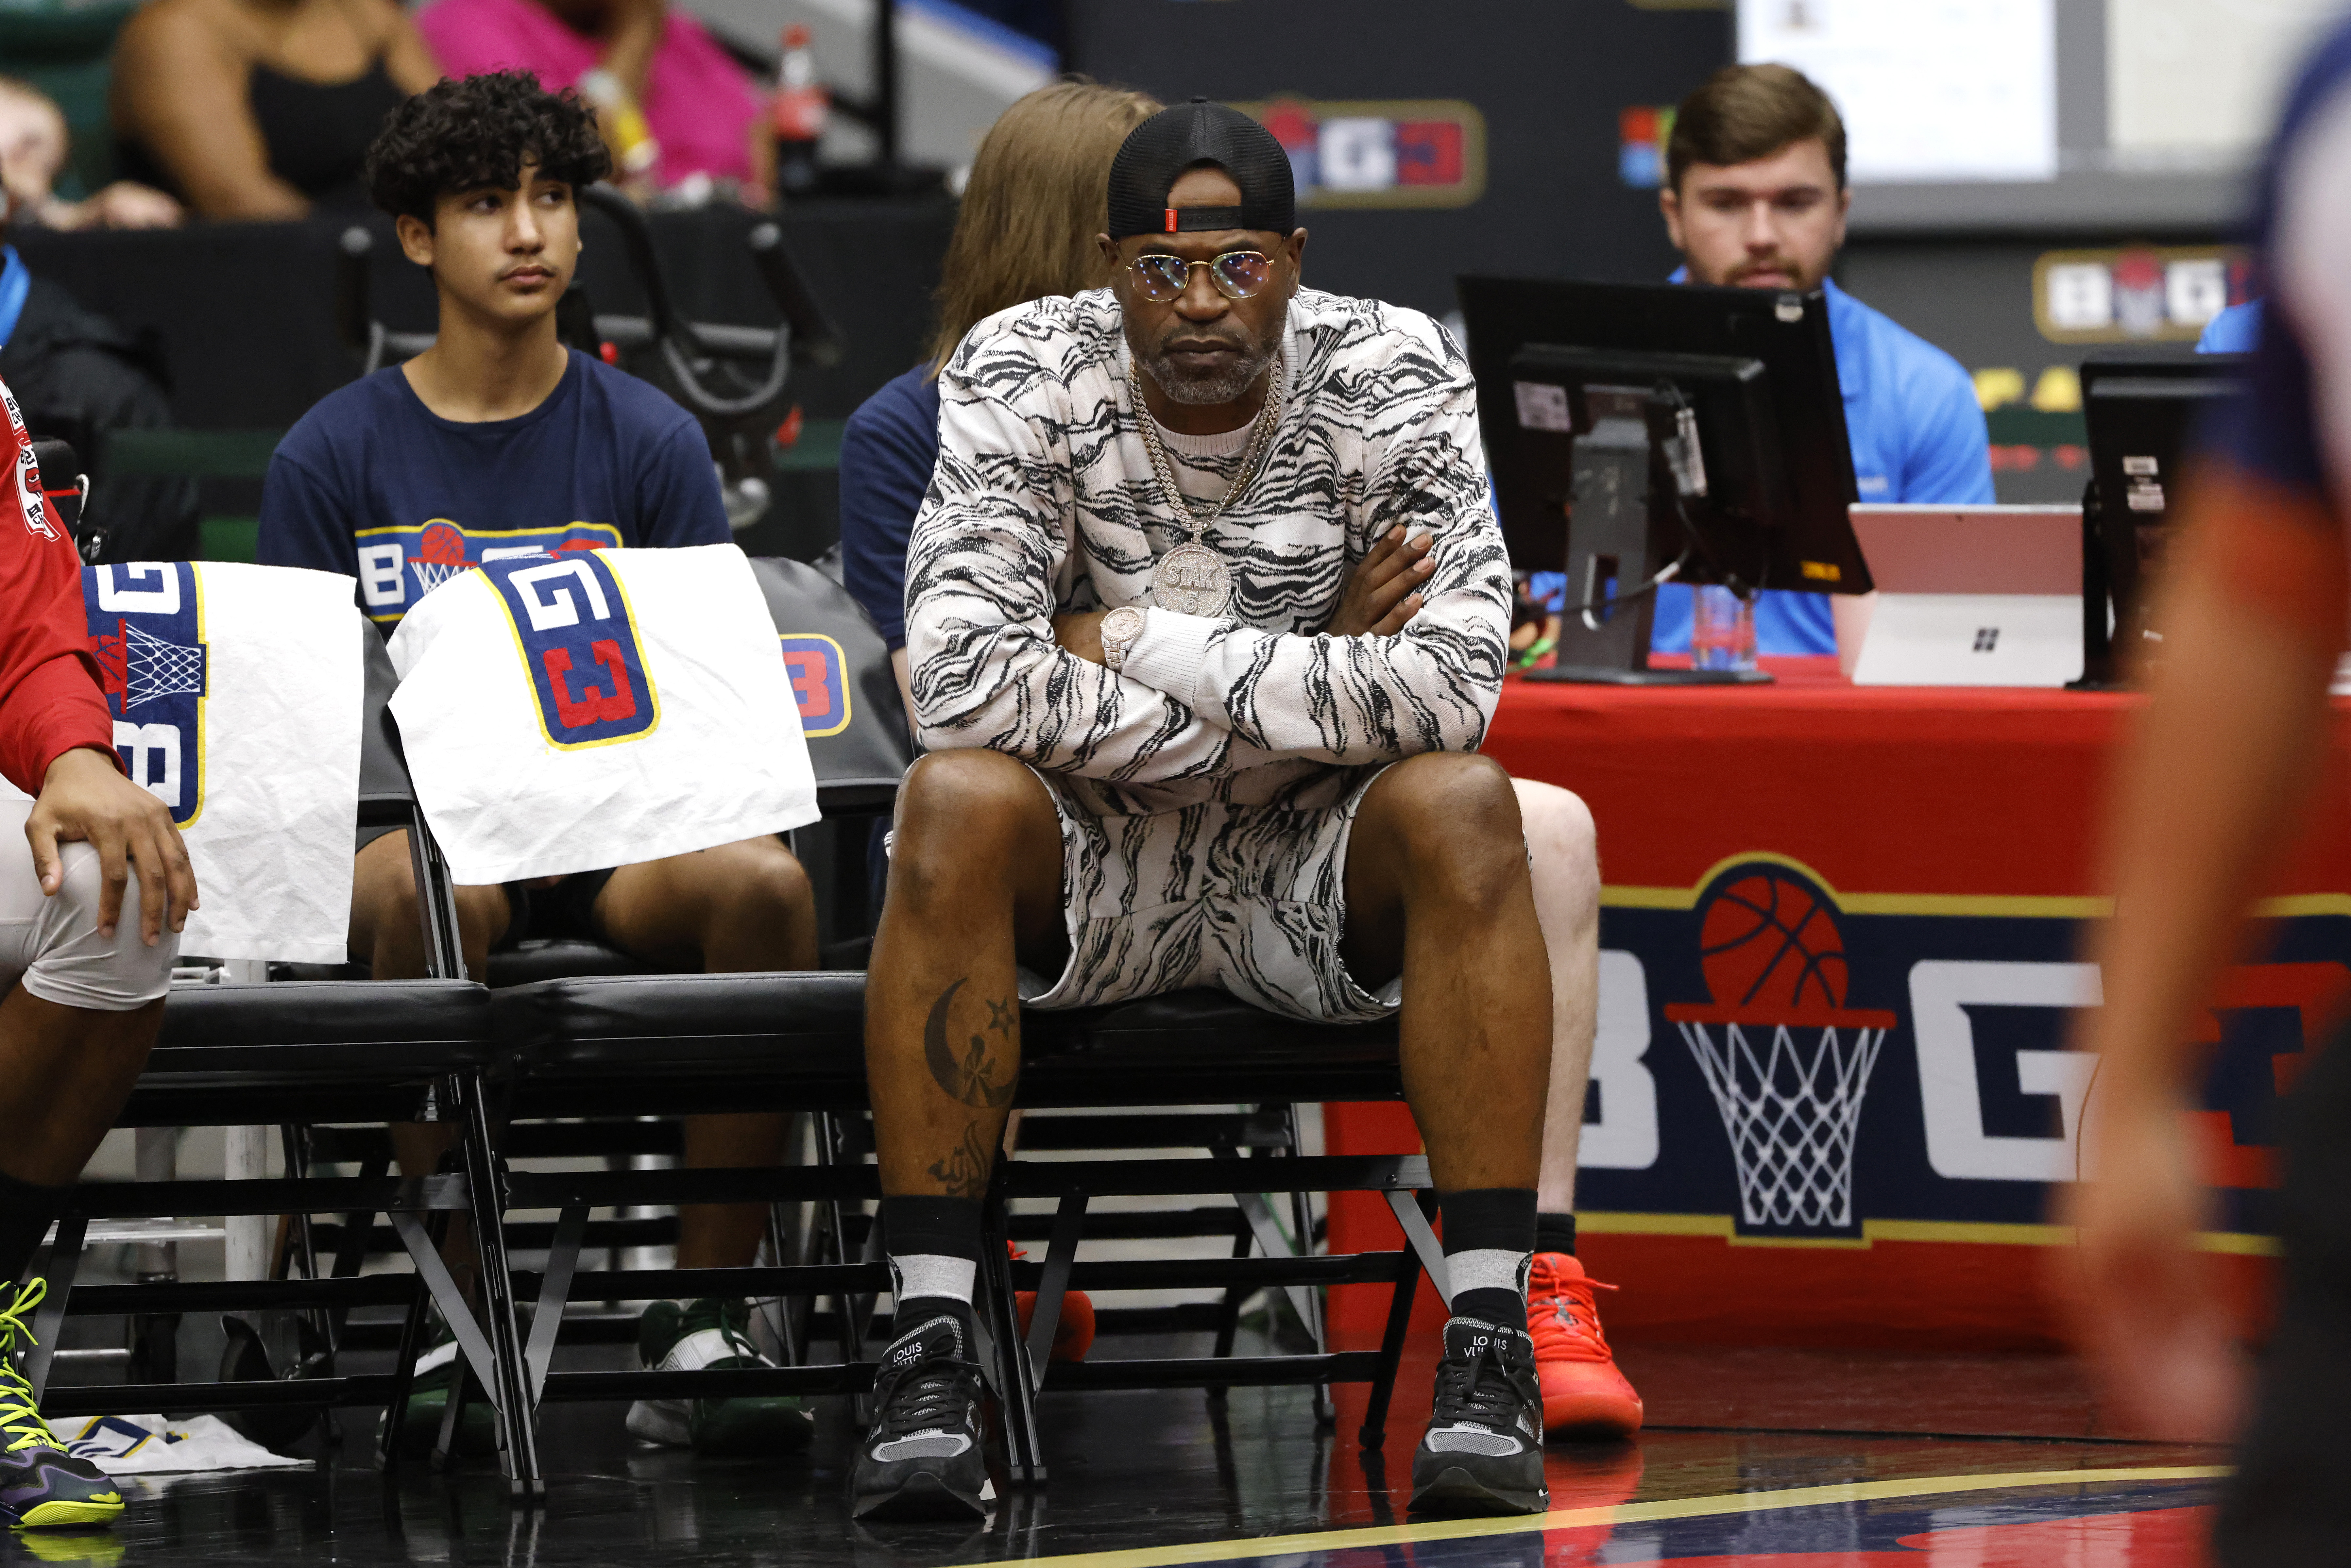 Stephen Jackson of the Trilogy looks on during a game against the Killer 3's during BIG3 Week Eight at Comerica Center on August 6, 2022, in Frisco, Texas. | Source: Getty Images